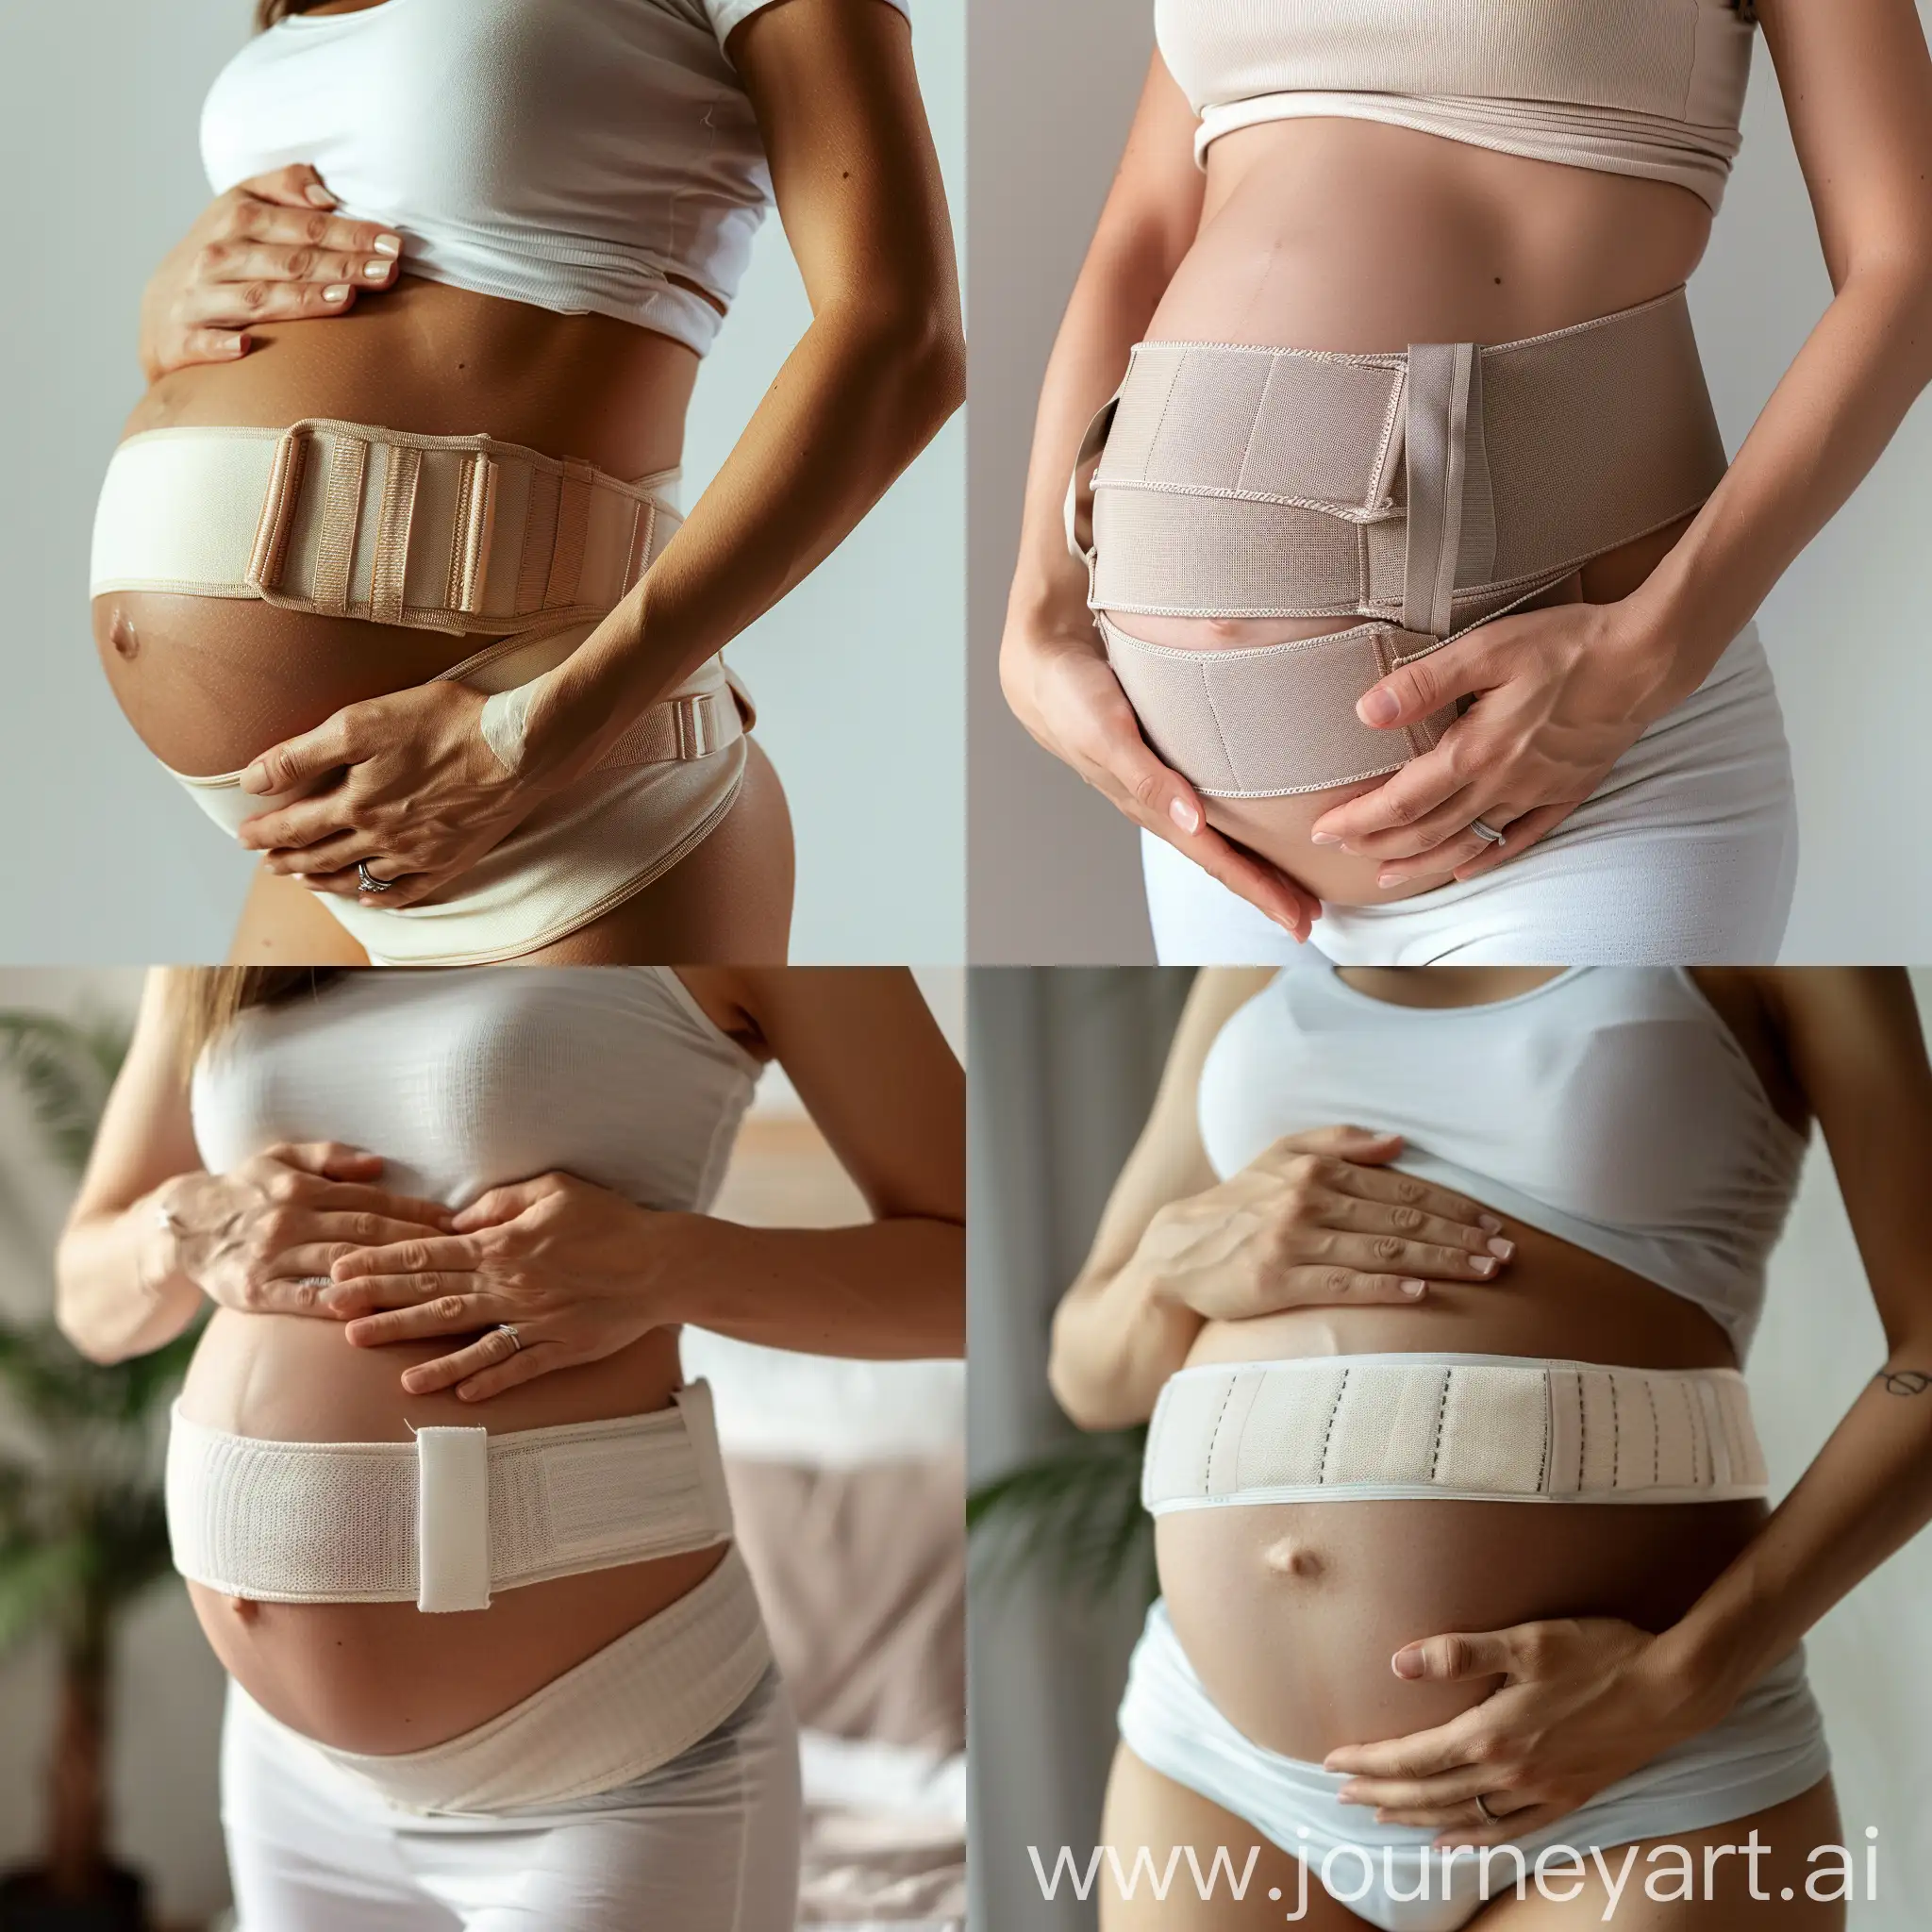 Pregnant-Womans-Belly-in-Orthopedic-Support-Bandage